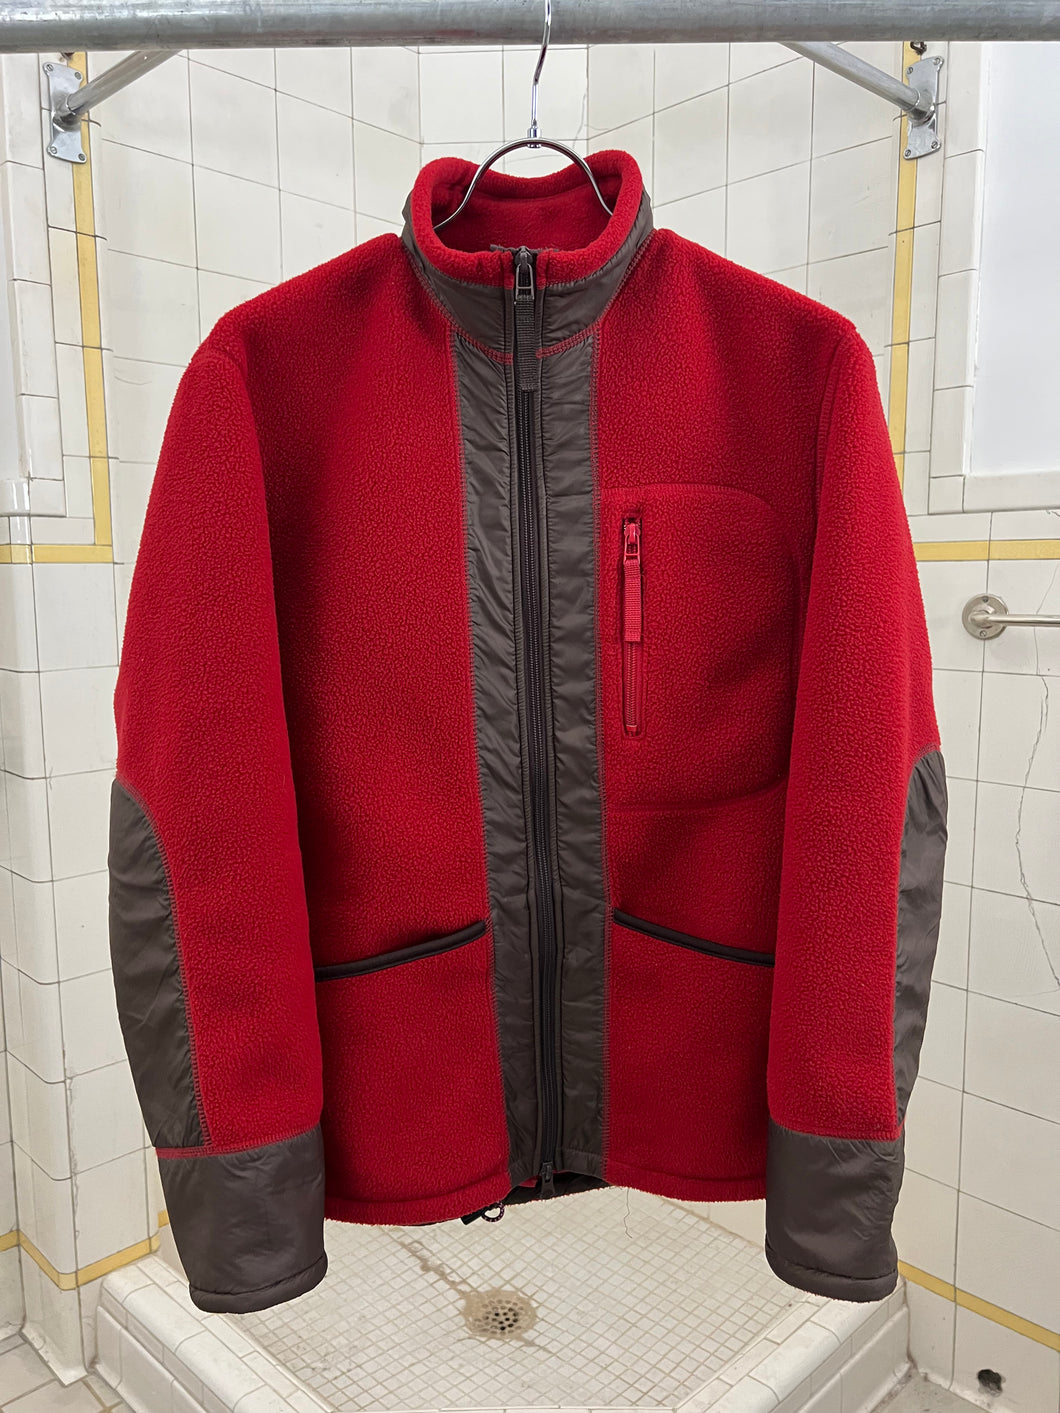 aw2000 Issey Miyake Red Fleece Technical Jacket - Size M